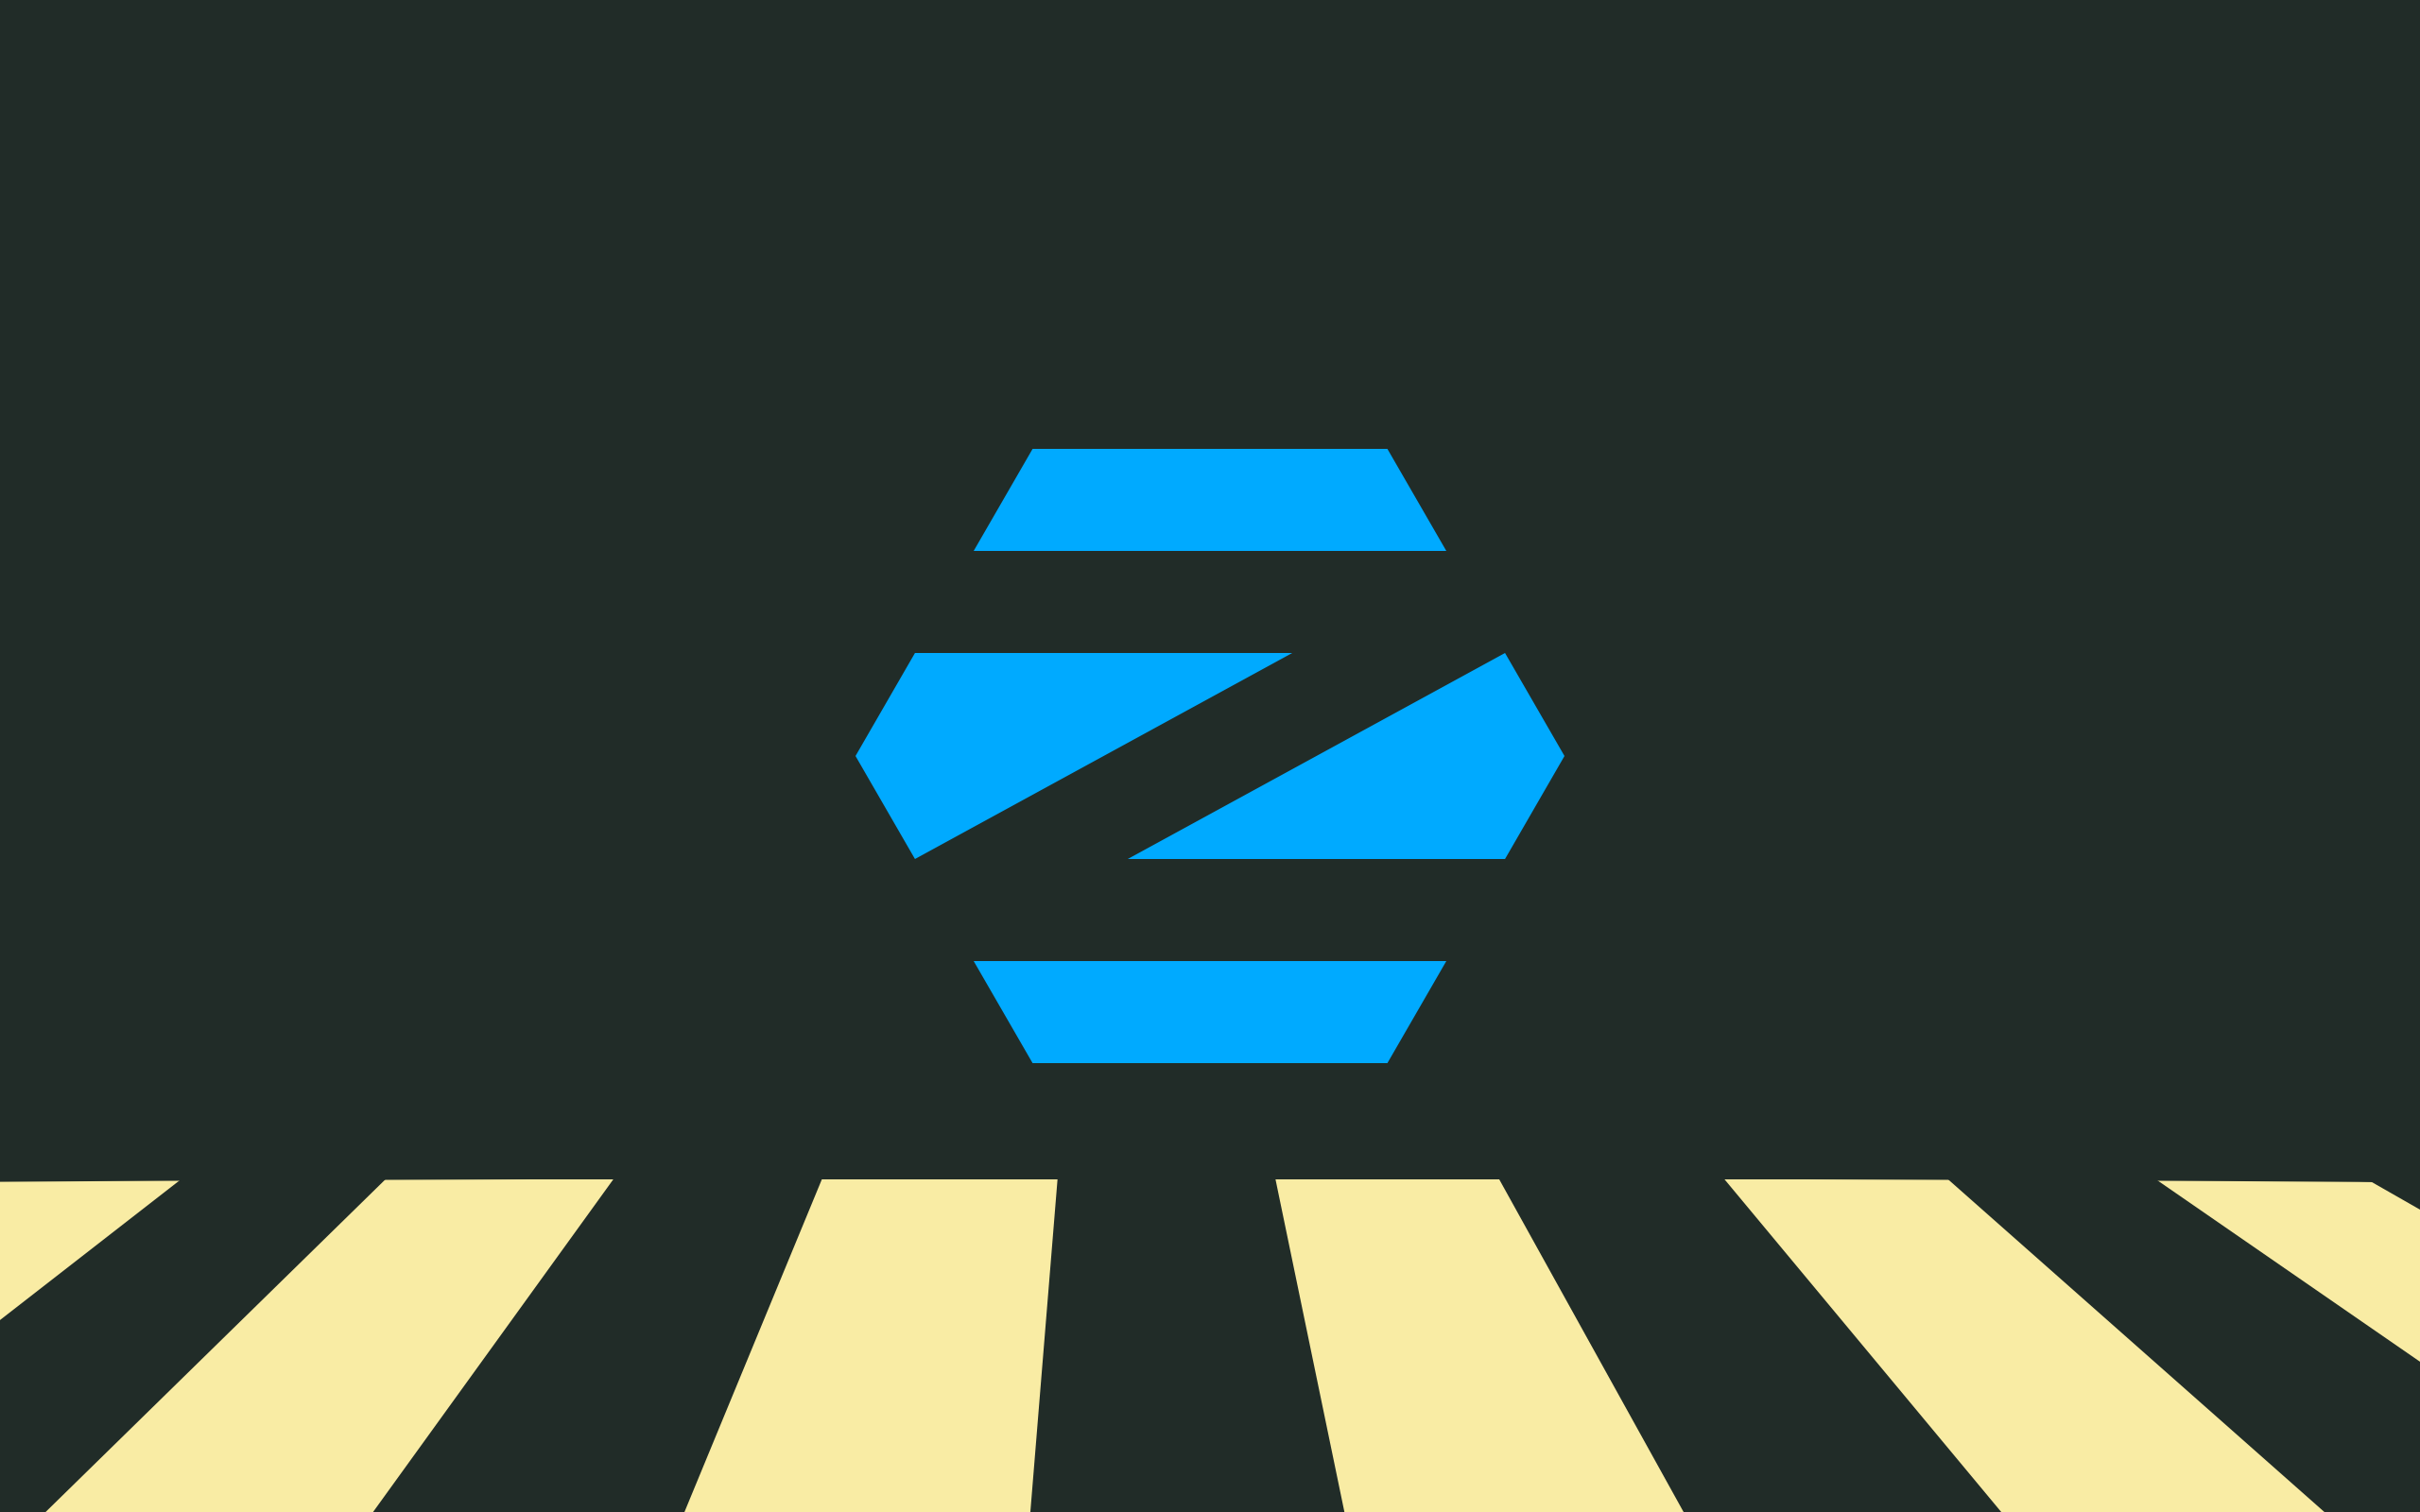 General 2560x1600 logo operating system minimalism simple background Zorin OS